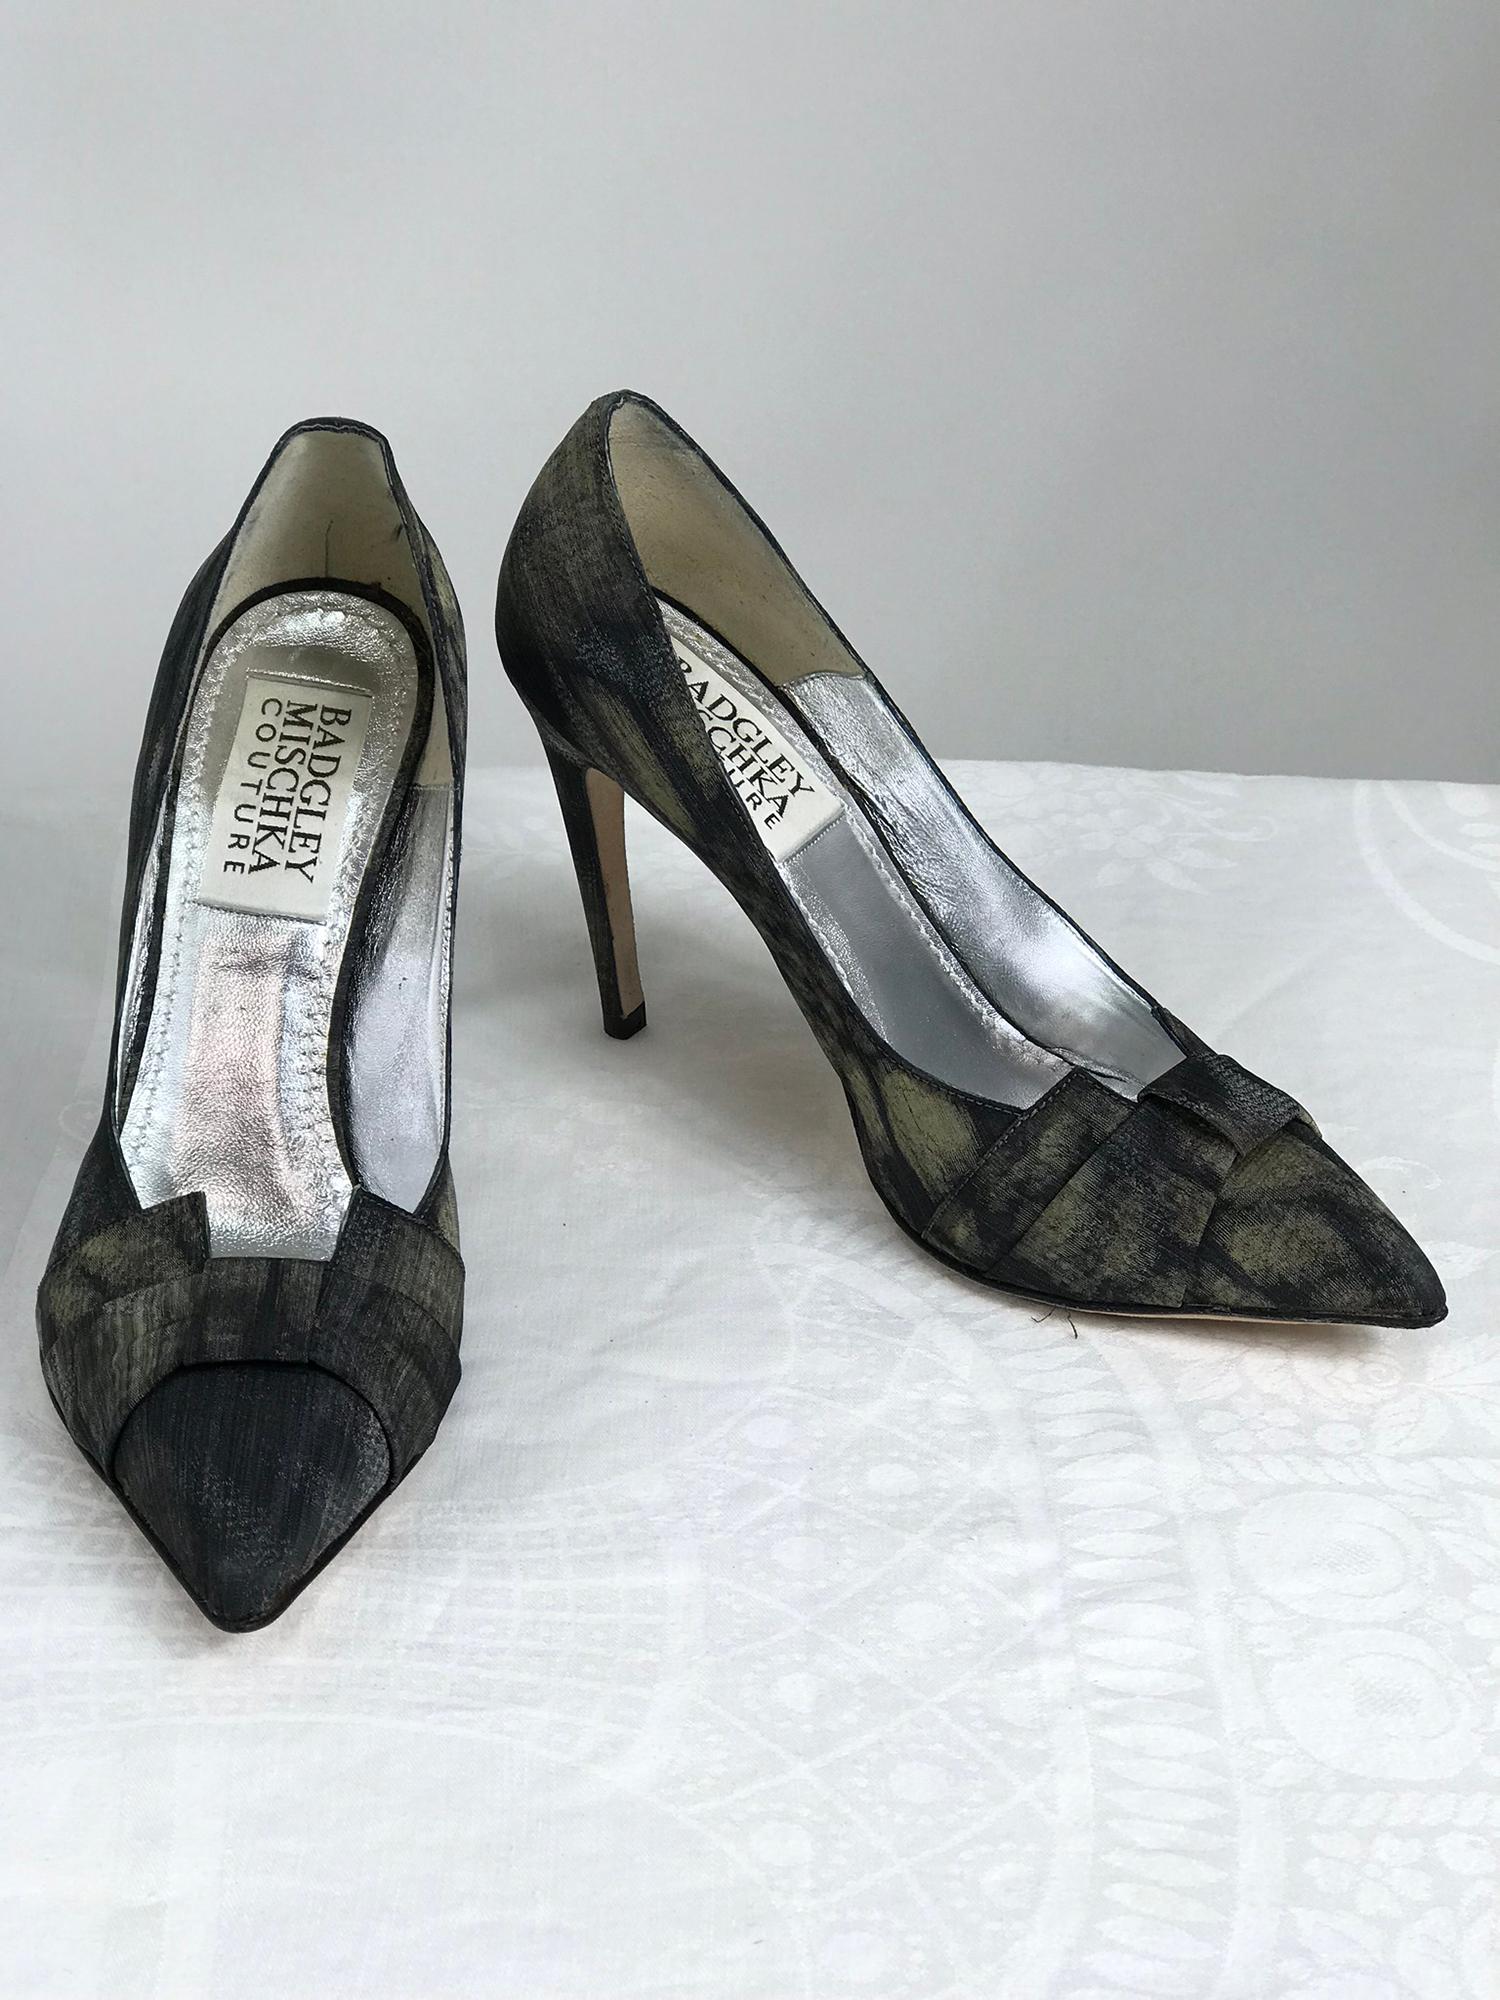 Badgley Mischka Couture black sunflower fabric high heel pumps 6 1/2.  4 inch heels.
Shaped bow front vamp, pointed toe pump in silky textured fabric in shades of black, grey, brown. With box and protector bag. Look barely worn. 